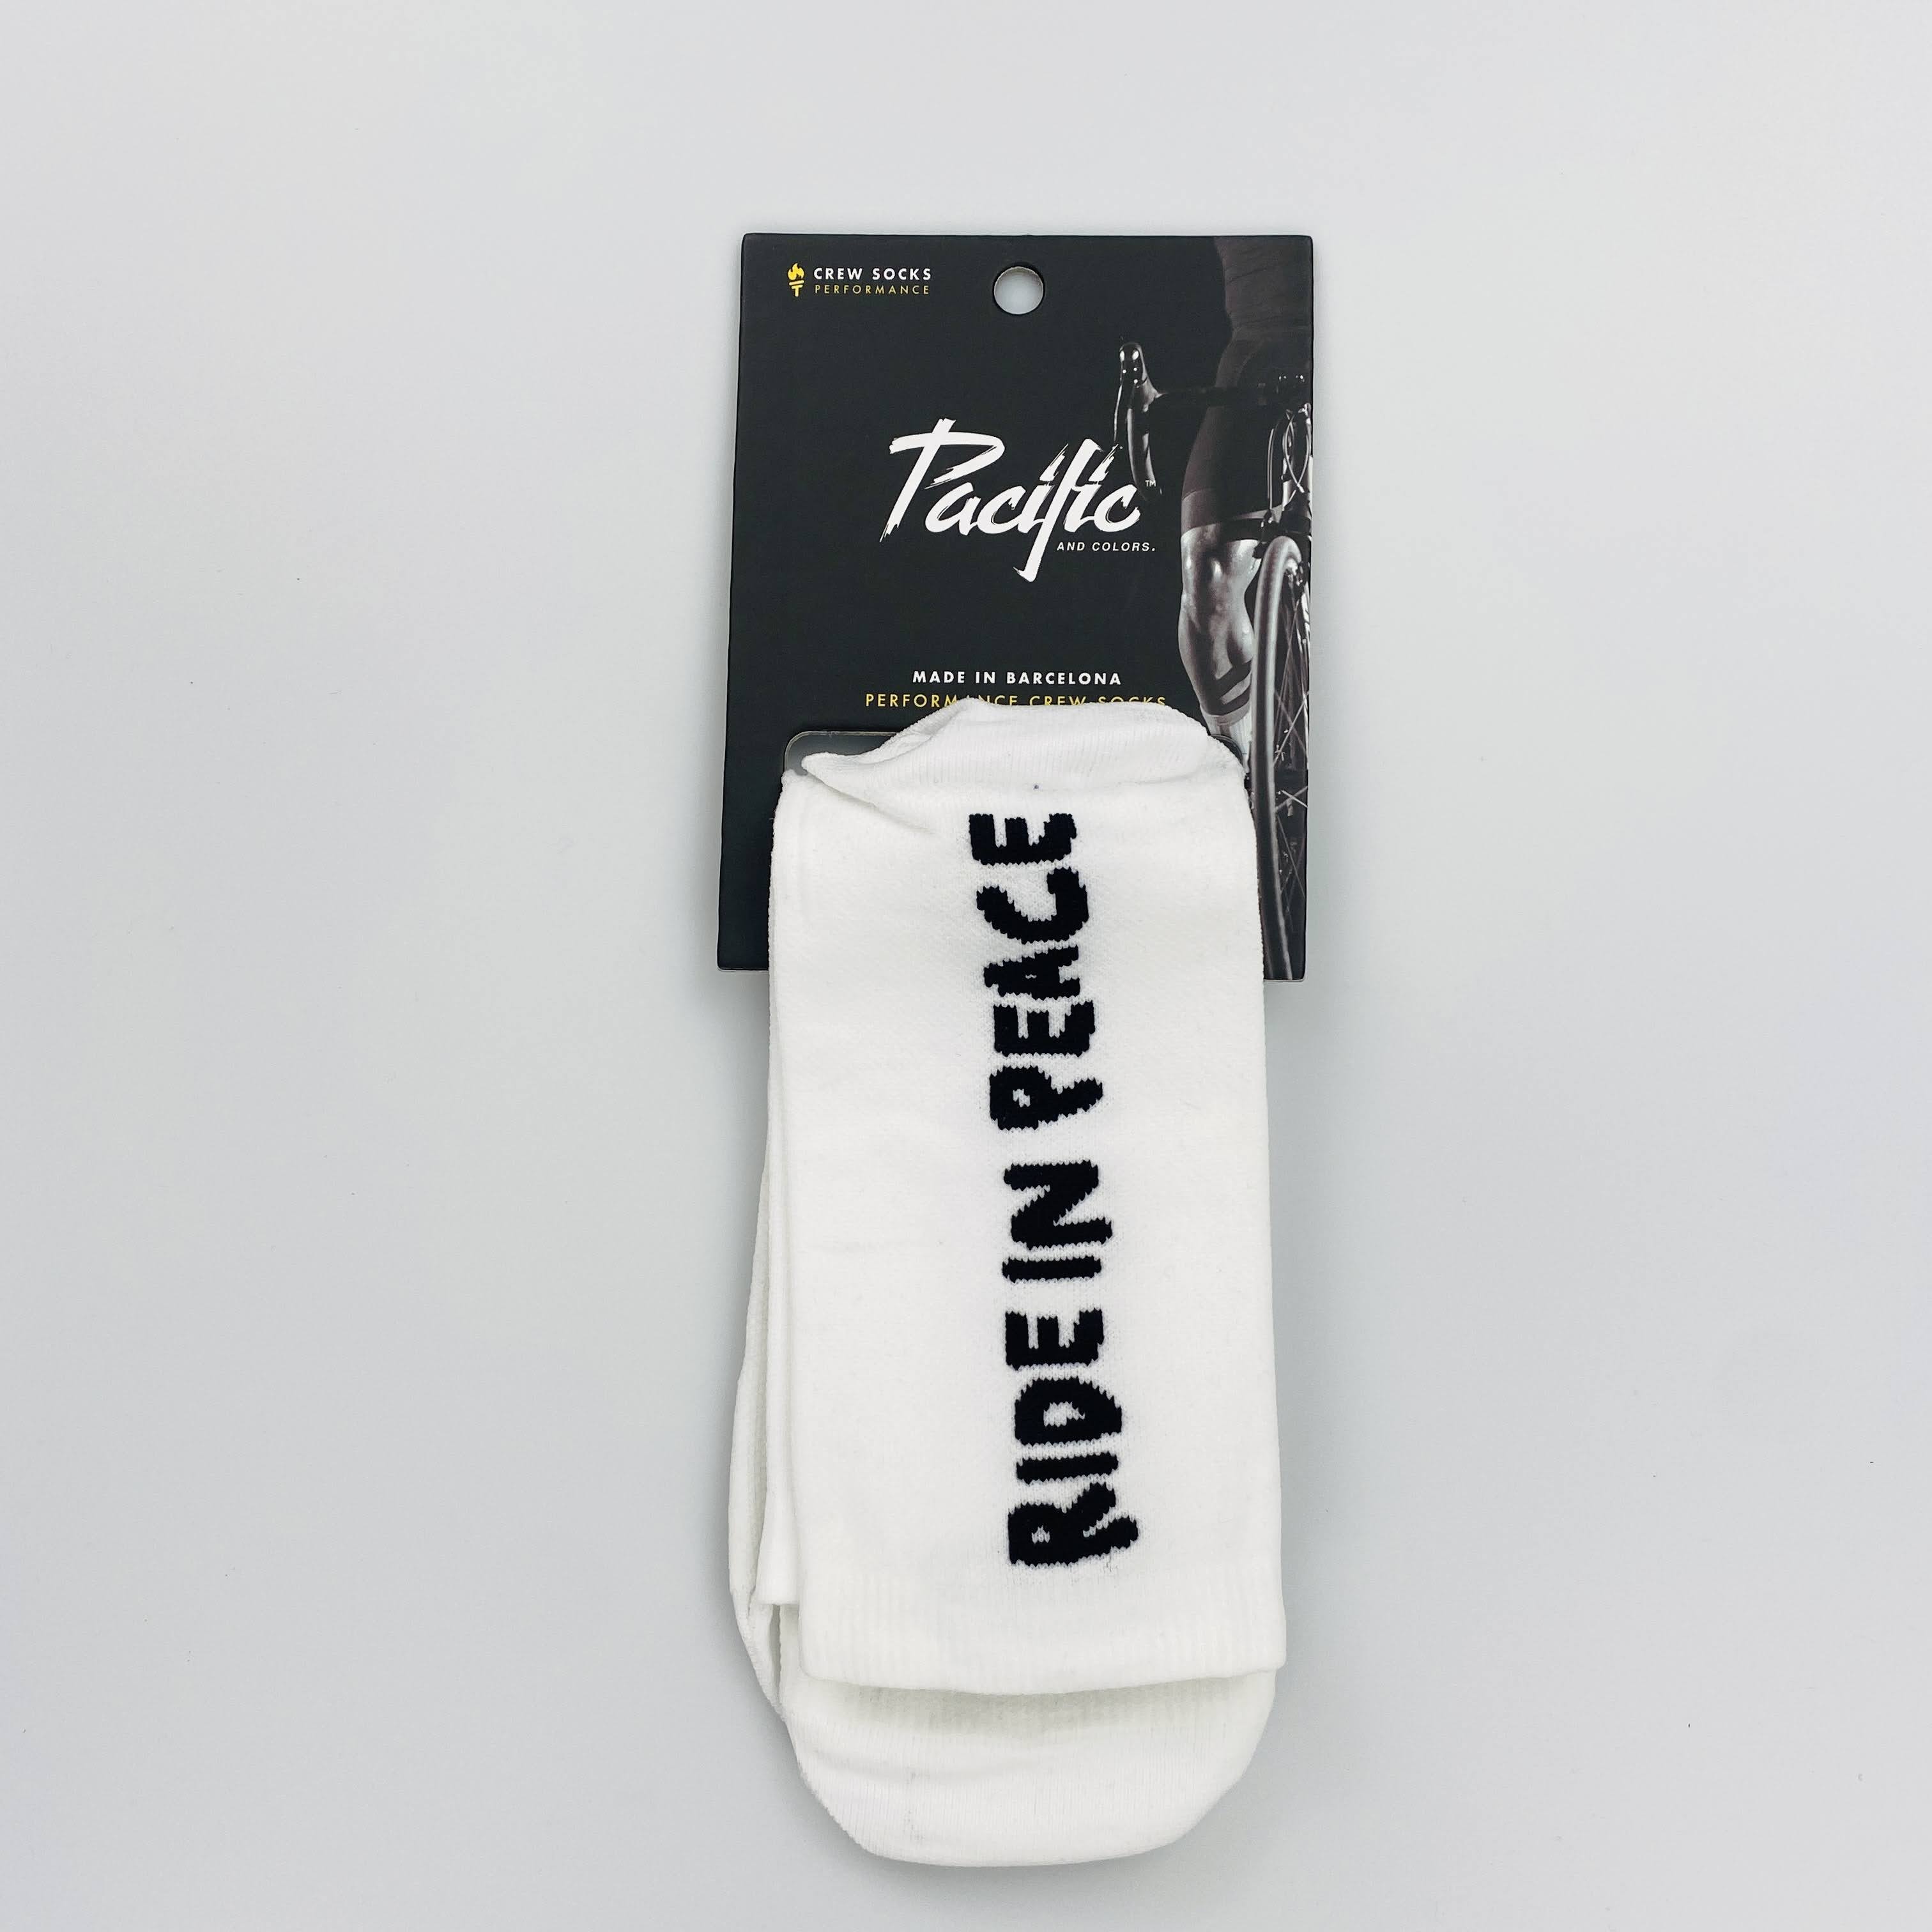 Pacific & Co Ride in Peace - Seconde main Chaussettes vélo - Blanc - 37 - 41 | Hardloop